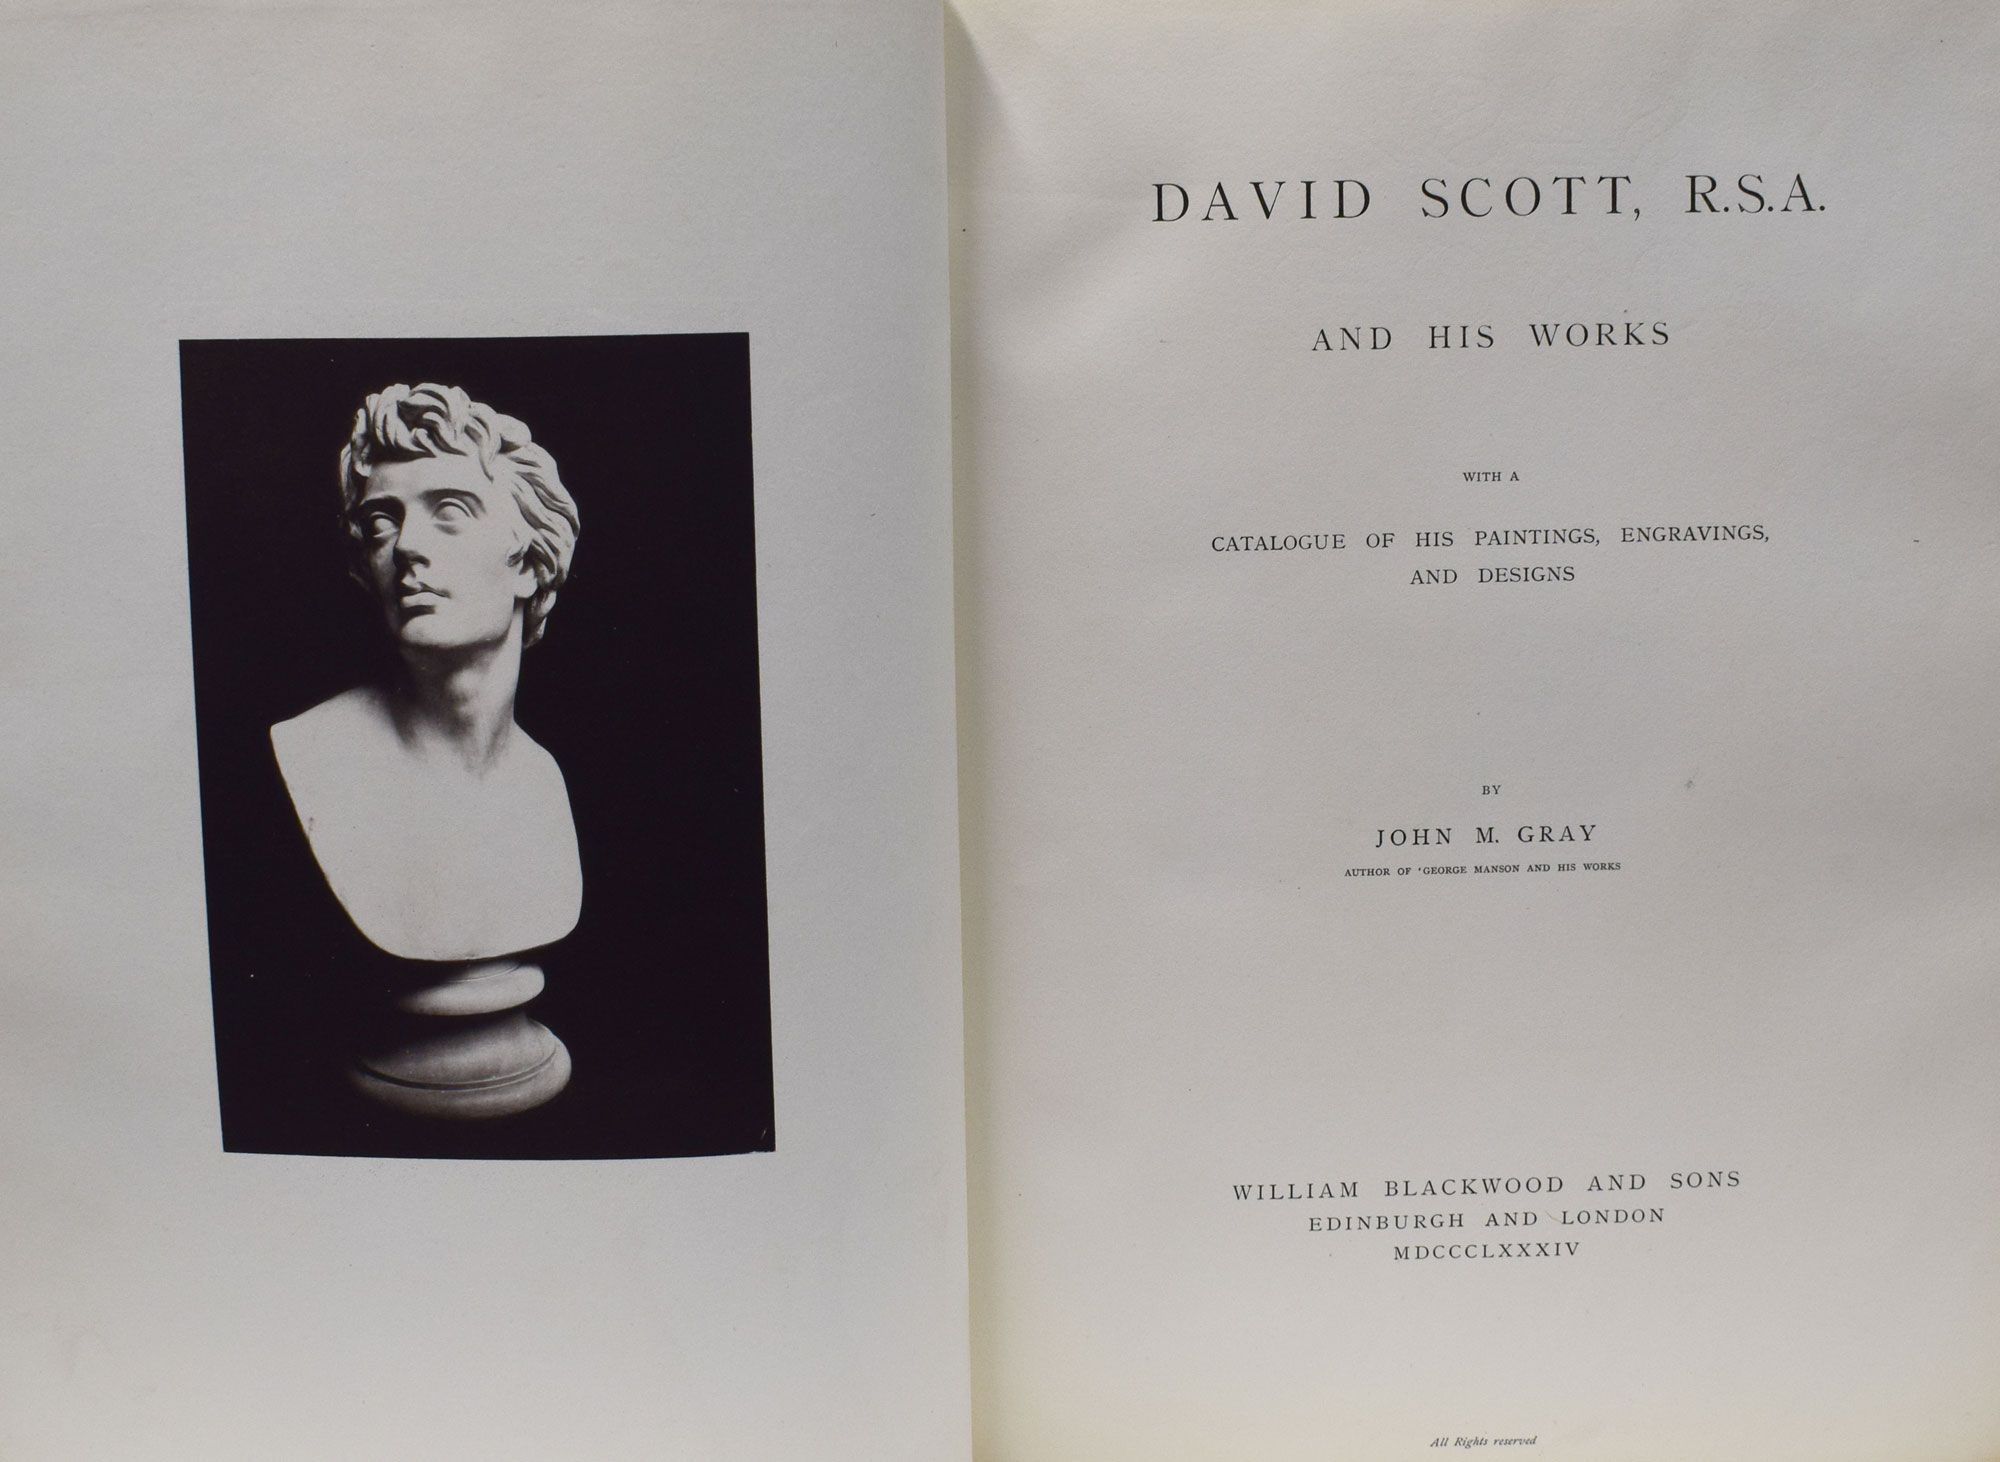 David Scott, R.S.A. and his Works with a Catalogue of his Paintings, Engravings and Designs.